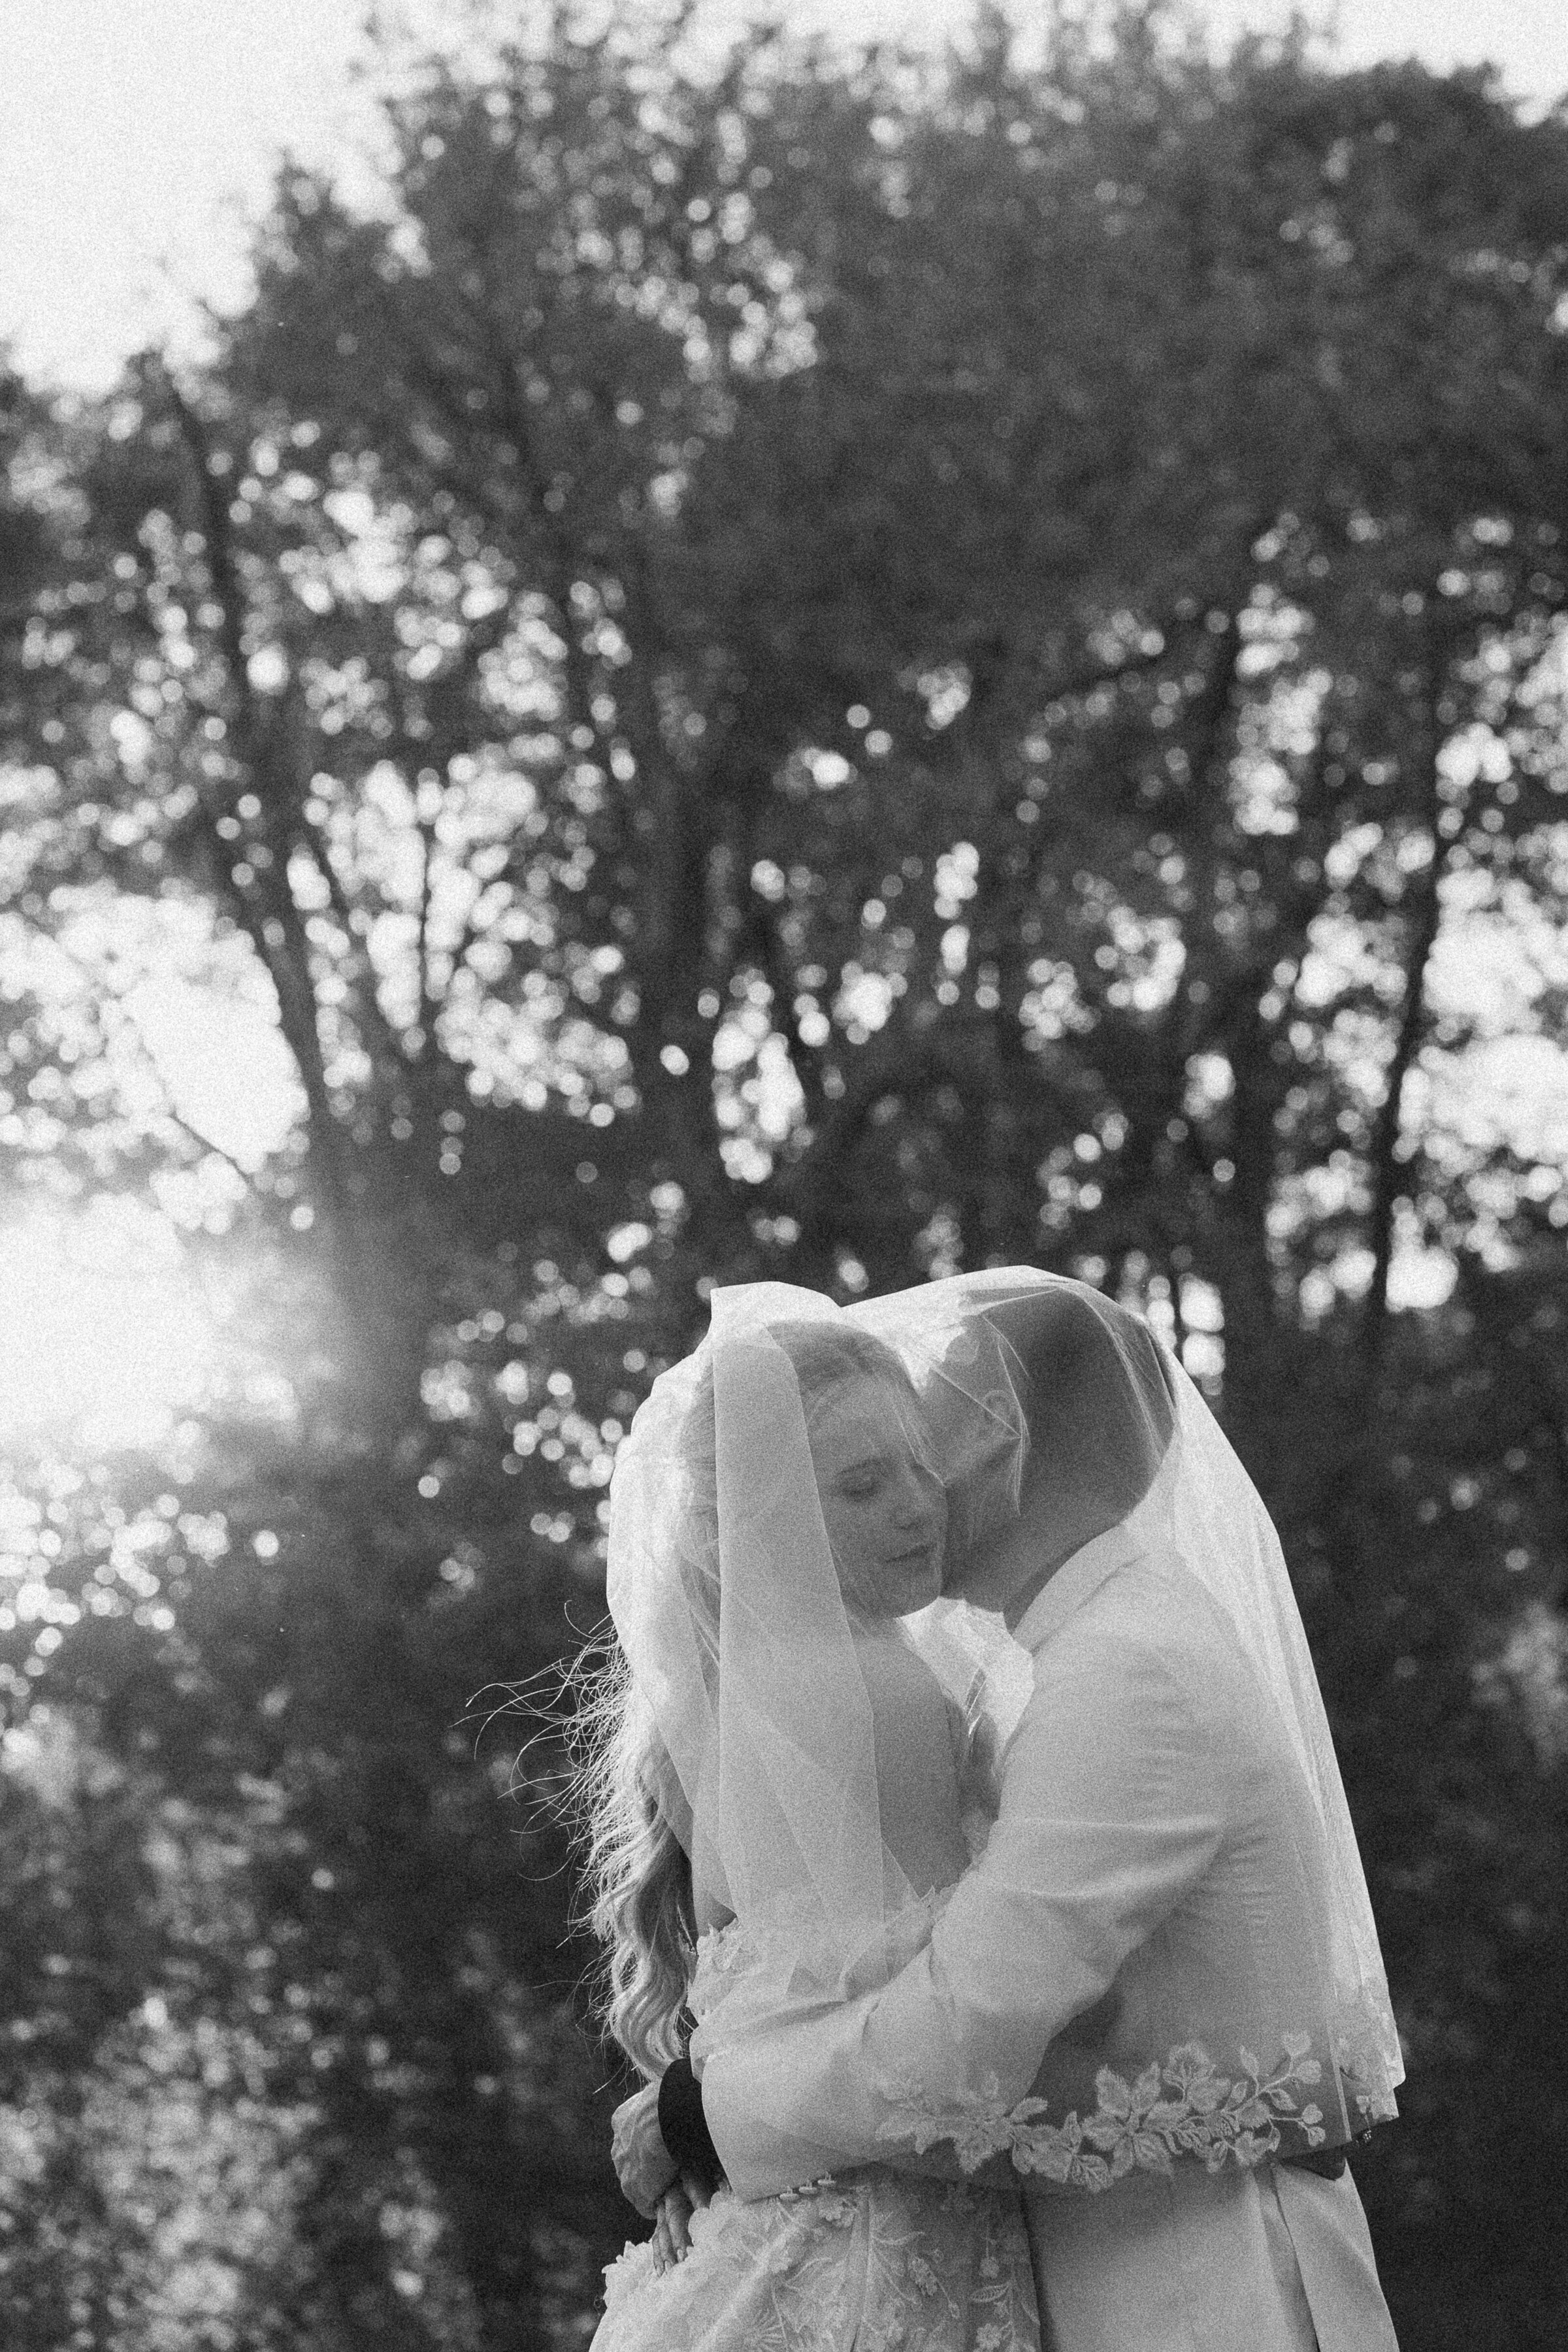 Bride and groom embrace under the veil in monochrome.